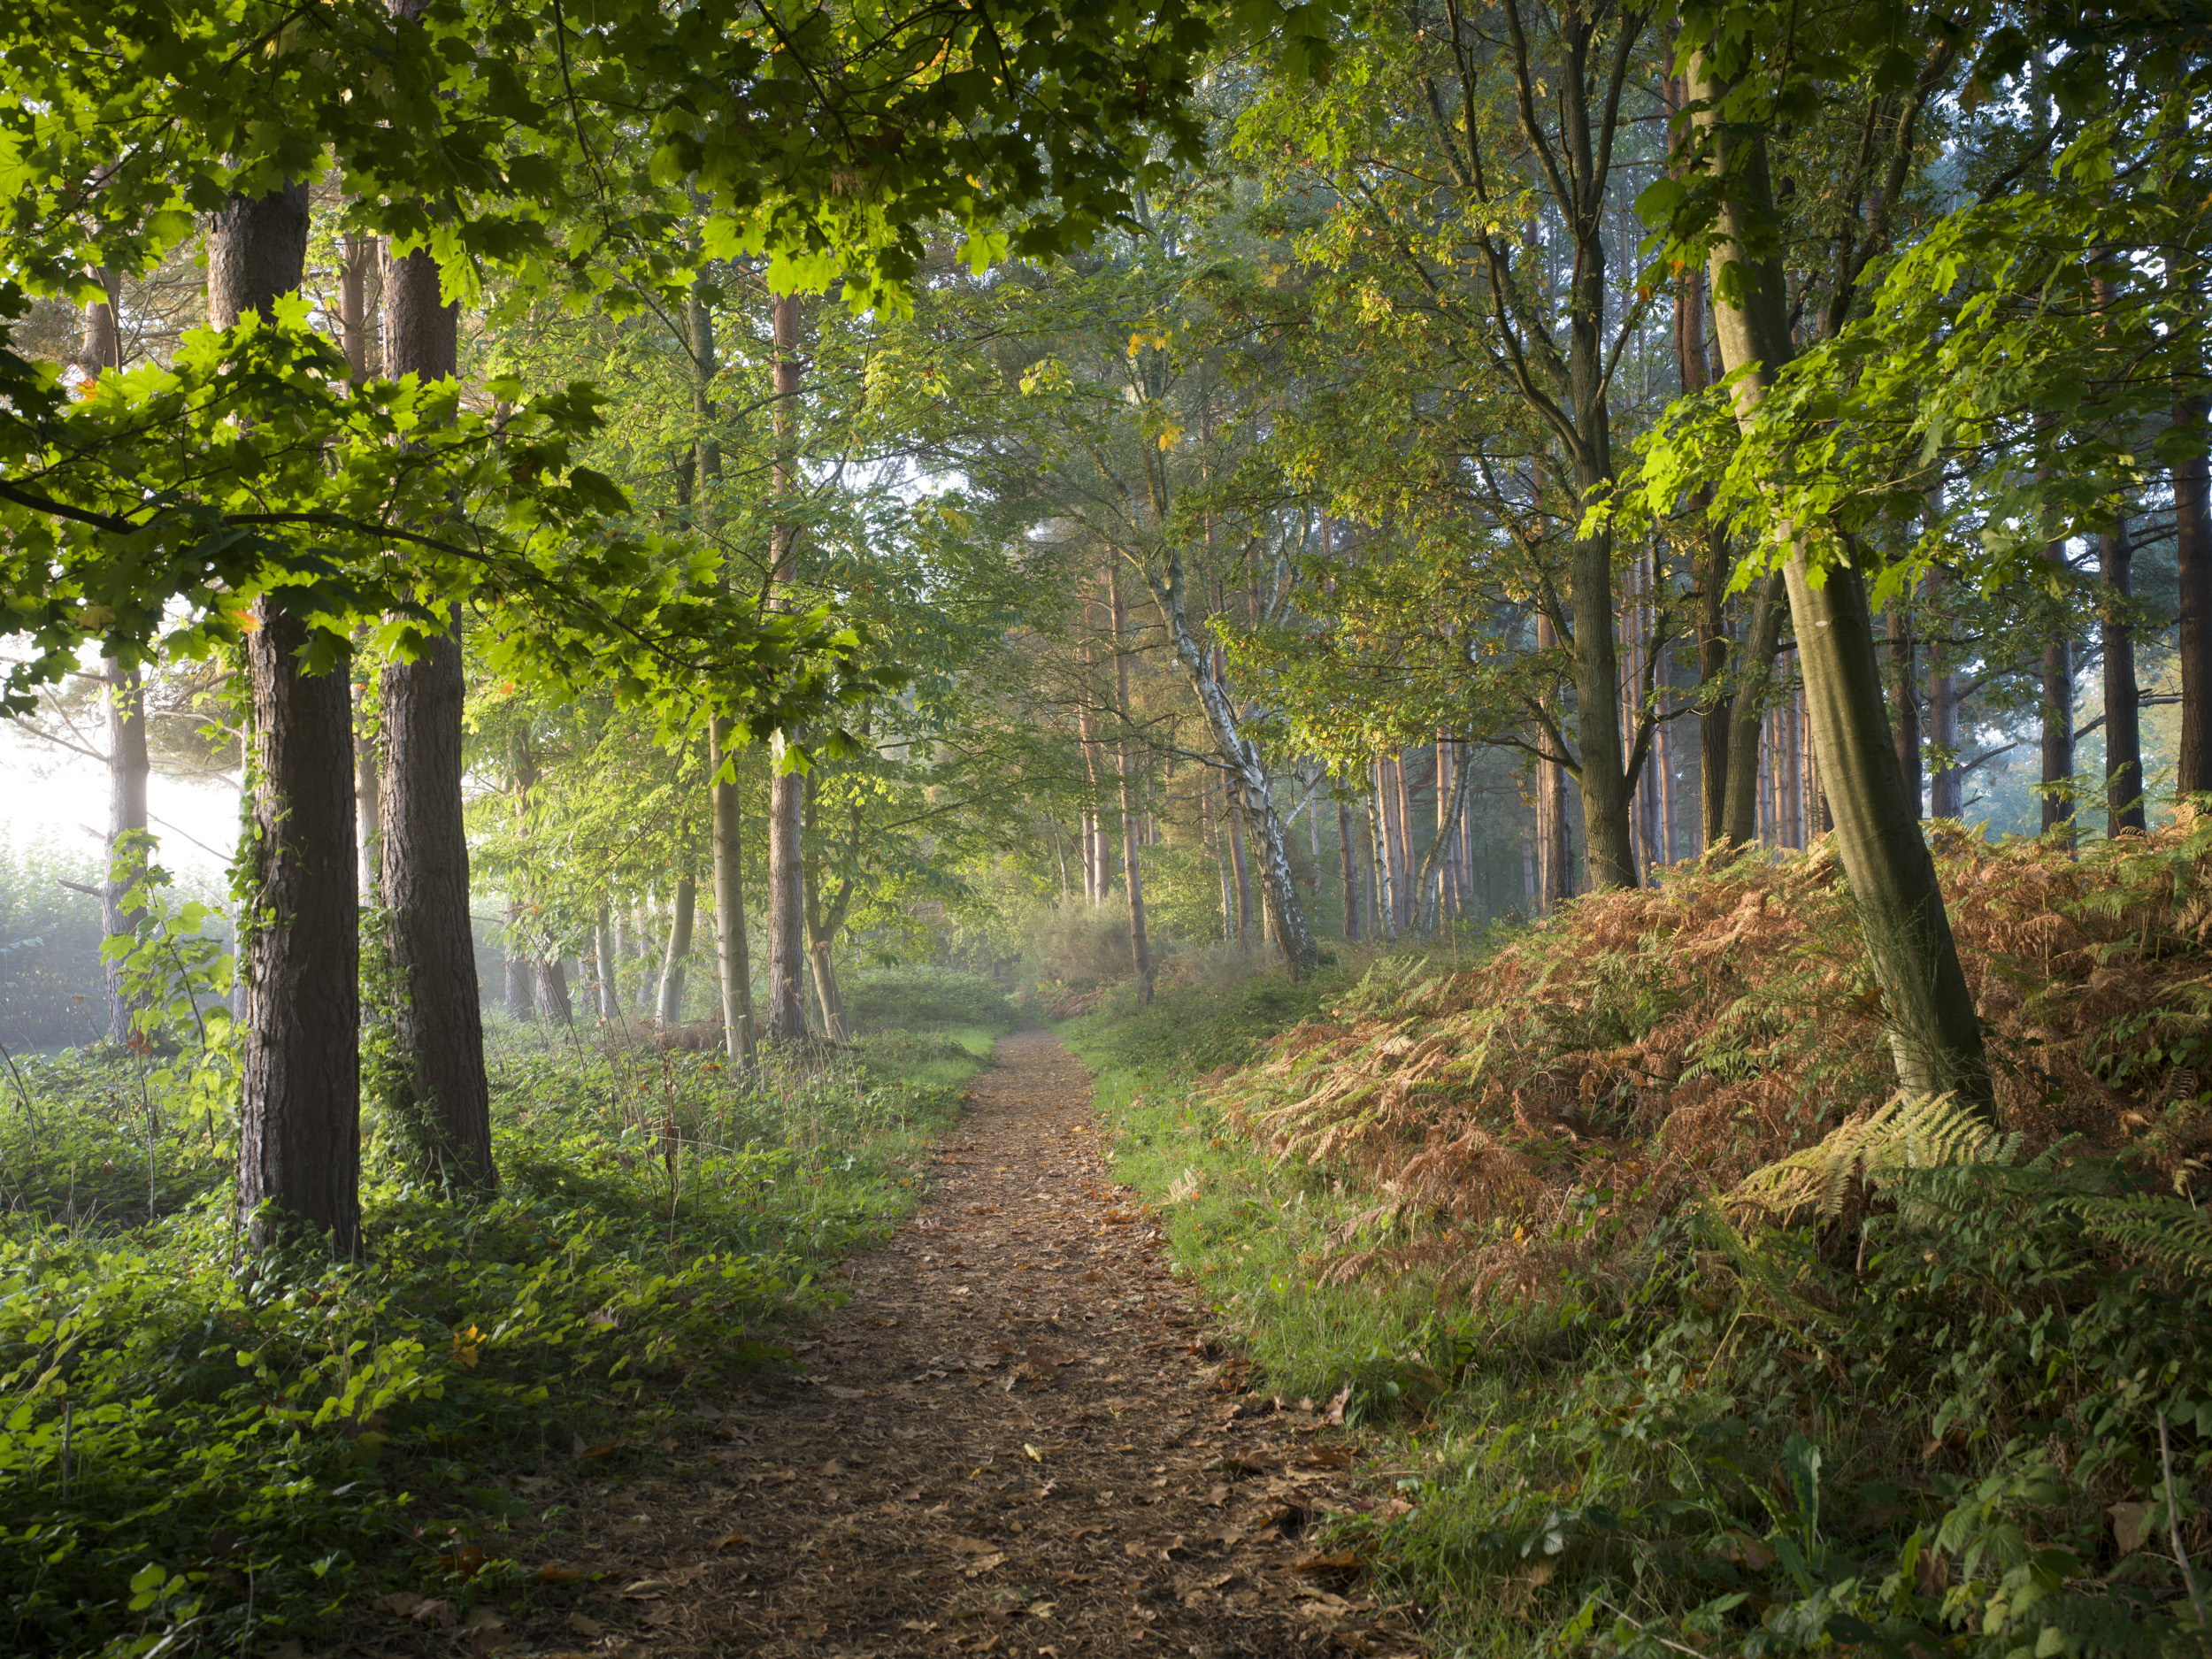 Sample image taken with the Hasselblad X2D 100C of a forest in morning light